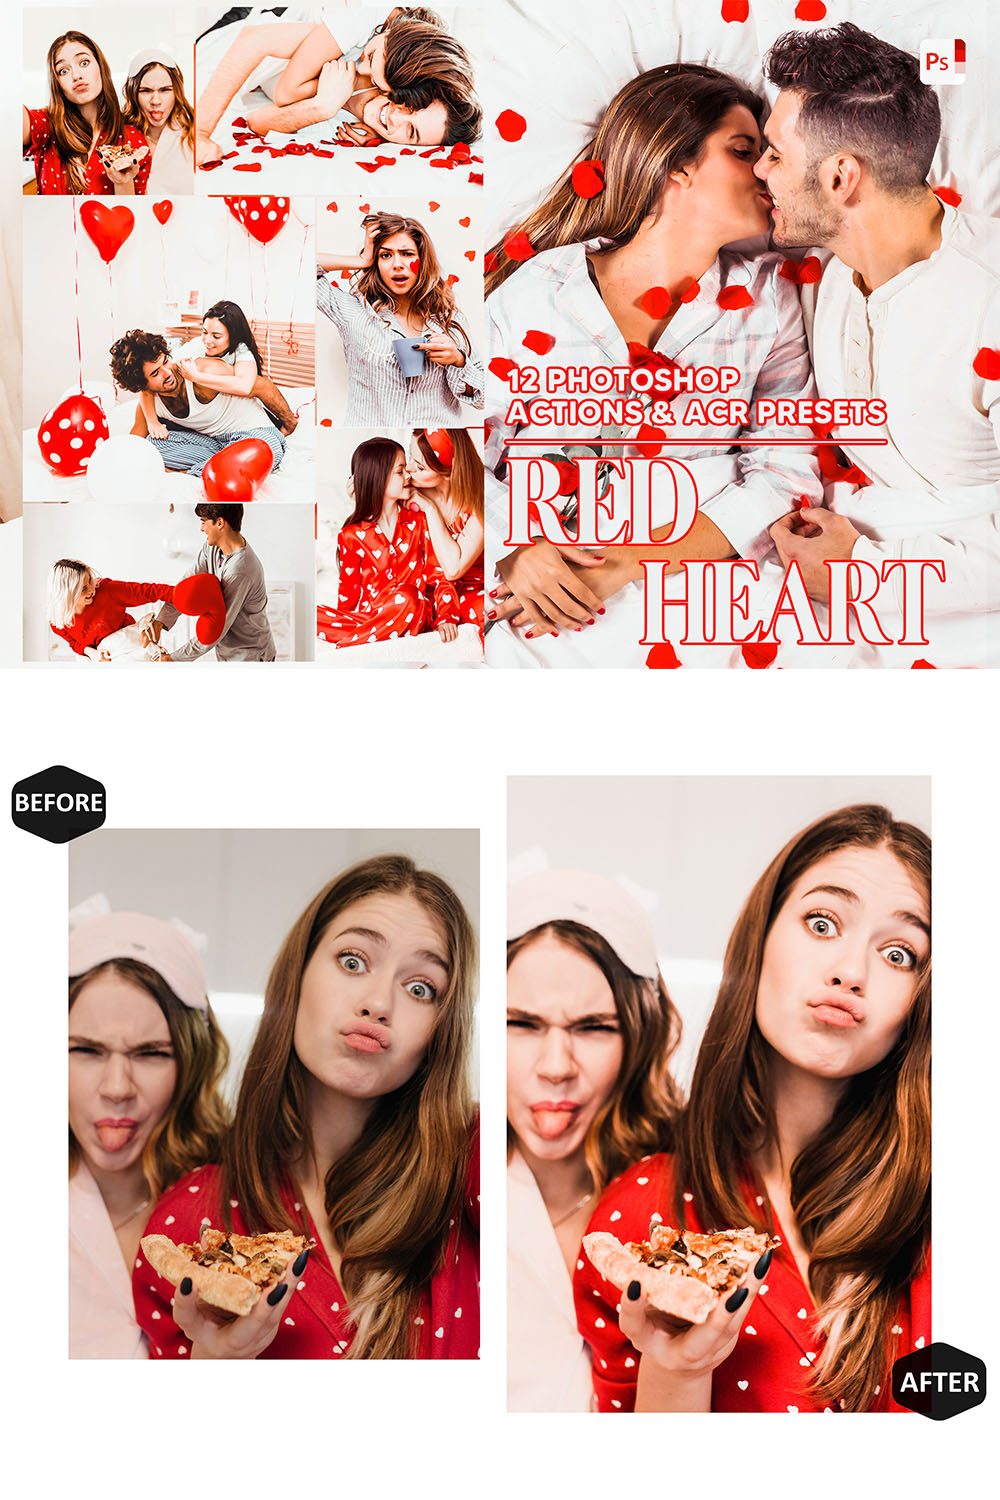 12 Photoshop Actions, Red Heart Ps Action, Love ACR Preset, Vibrant Ps Filter, Atn Portrait And Lifestyle Theme For Instagram, Blogger pinterest preview image.